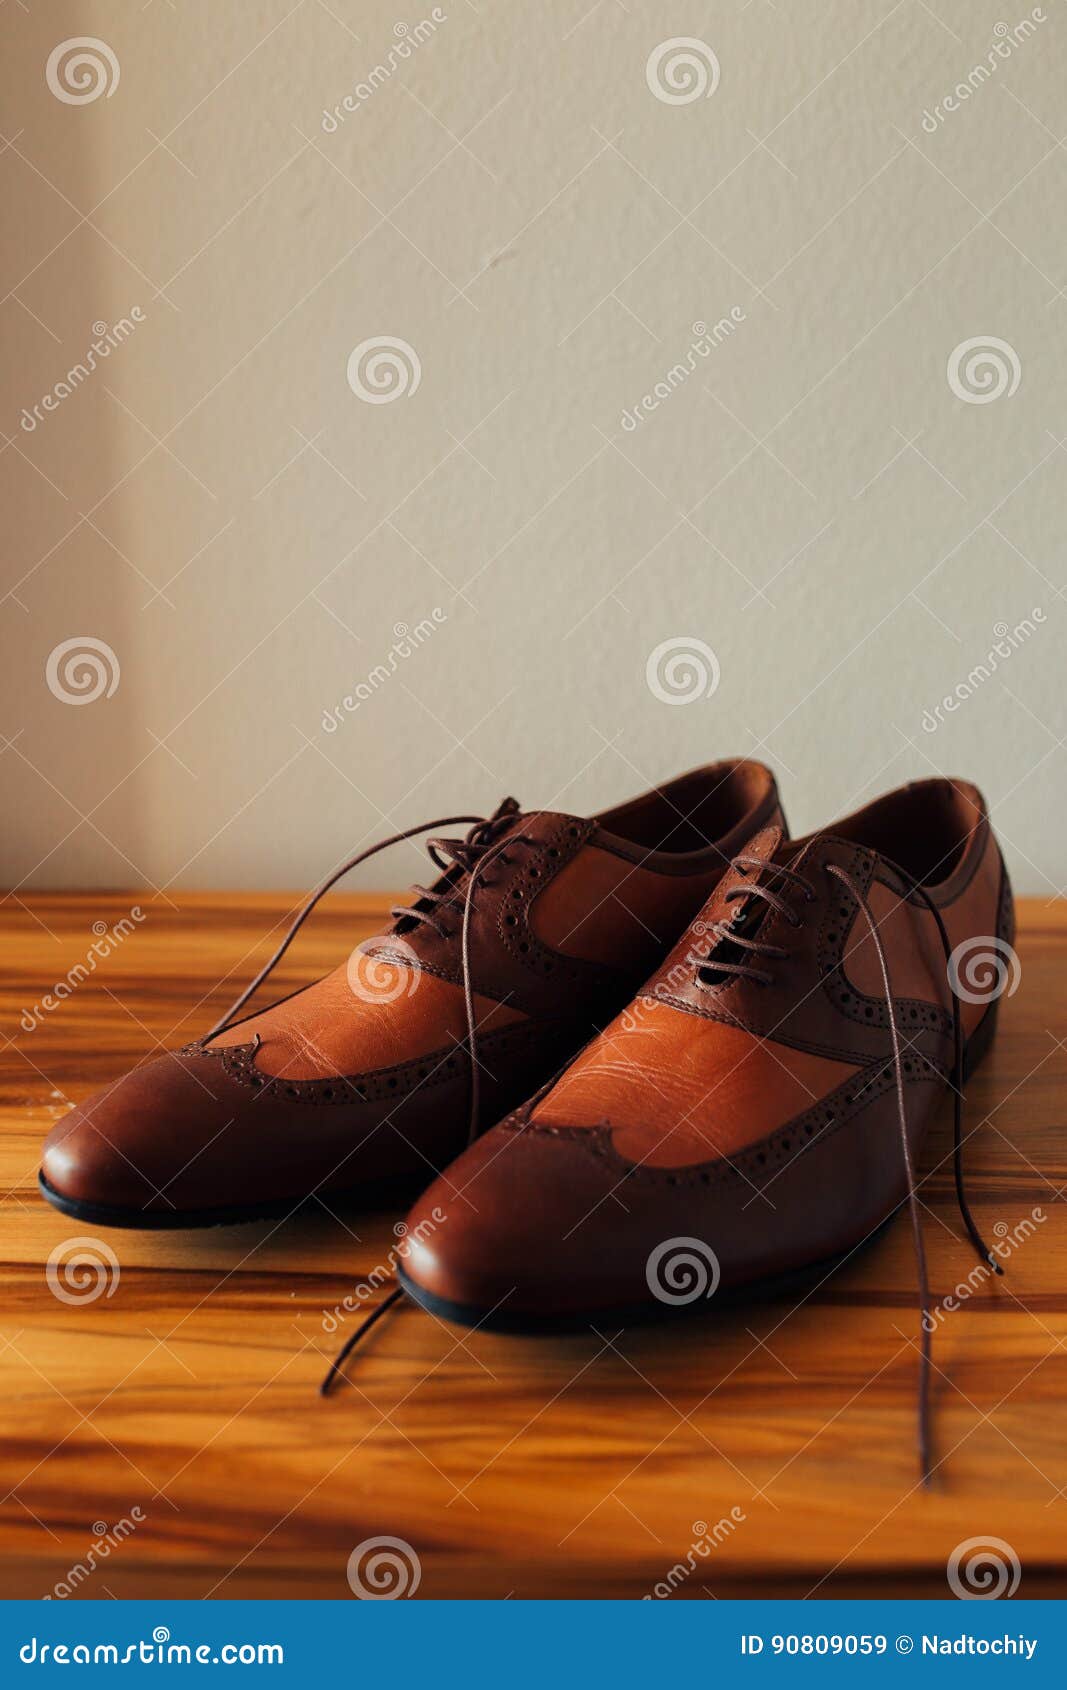 Men`s Black Shoes on the Floor Stock Image - Image of handmade, office ...